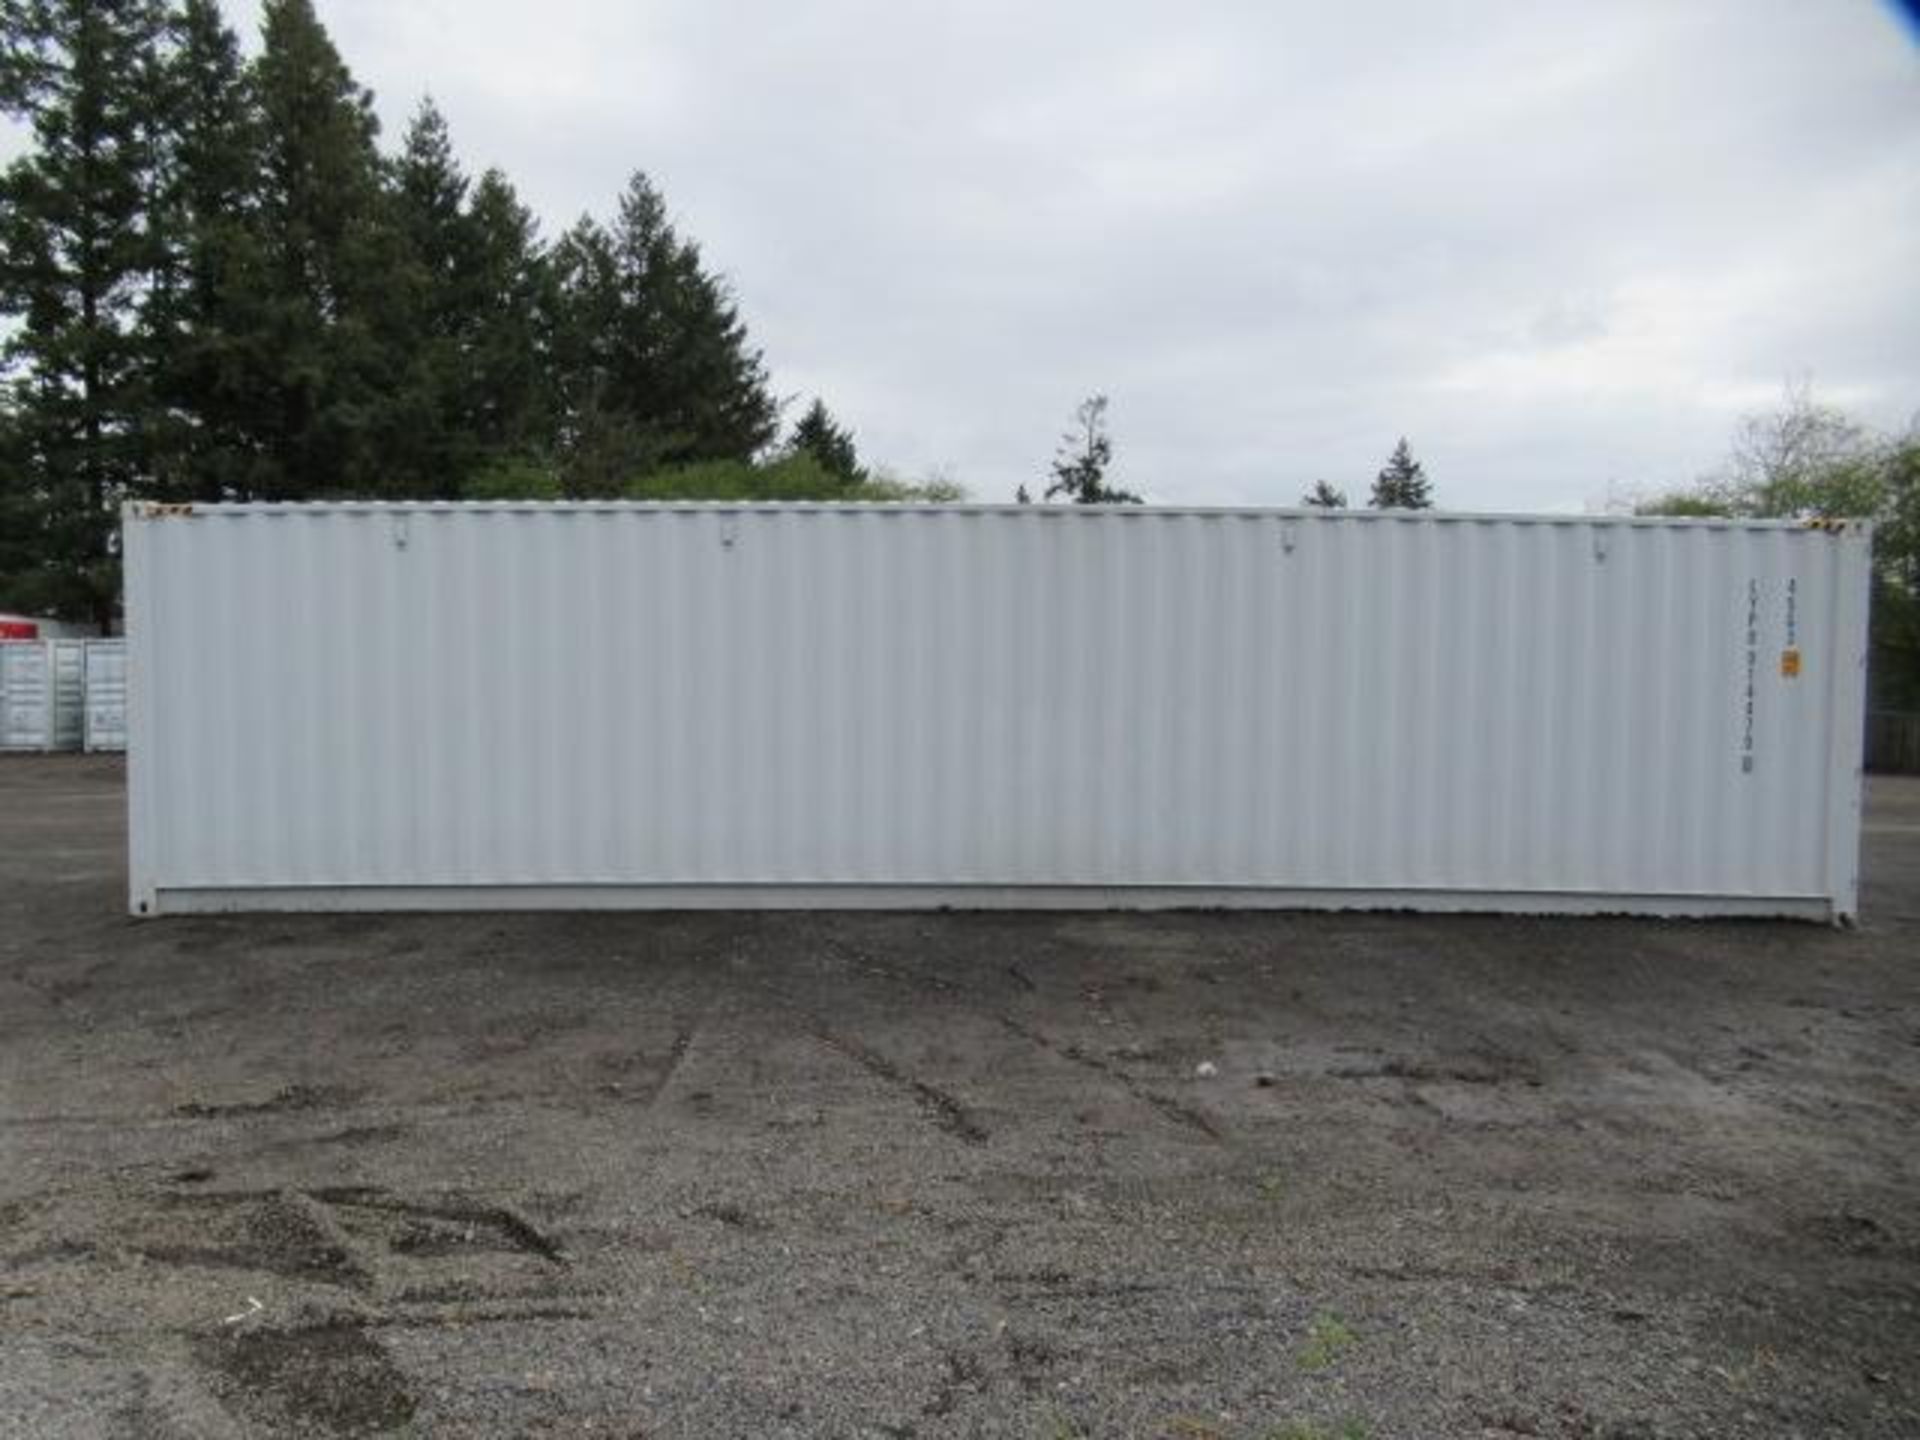 2024 40' HIGH CUBE SHIPPING CONTAINER W/ (2) SIDE DOORS, SER#: LYPU0144706 (UNUSED) - Image 3 of 6